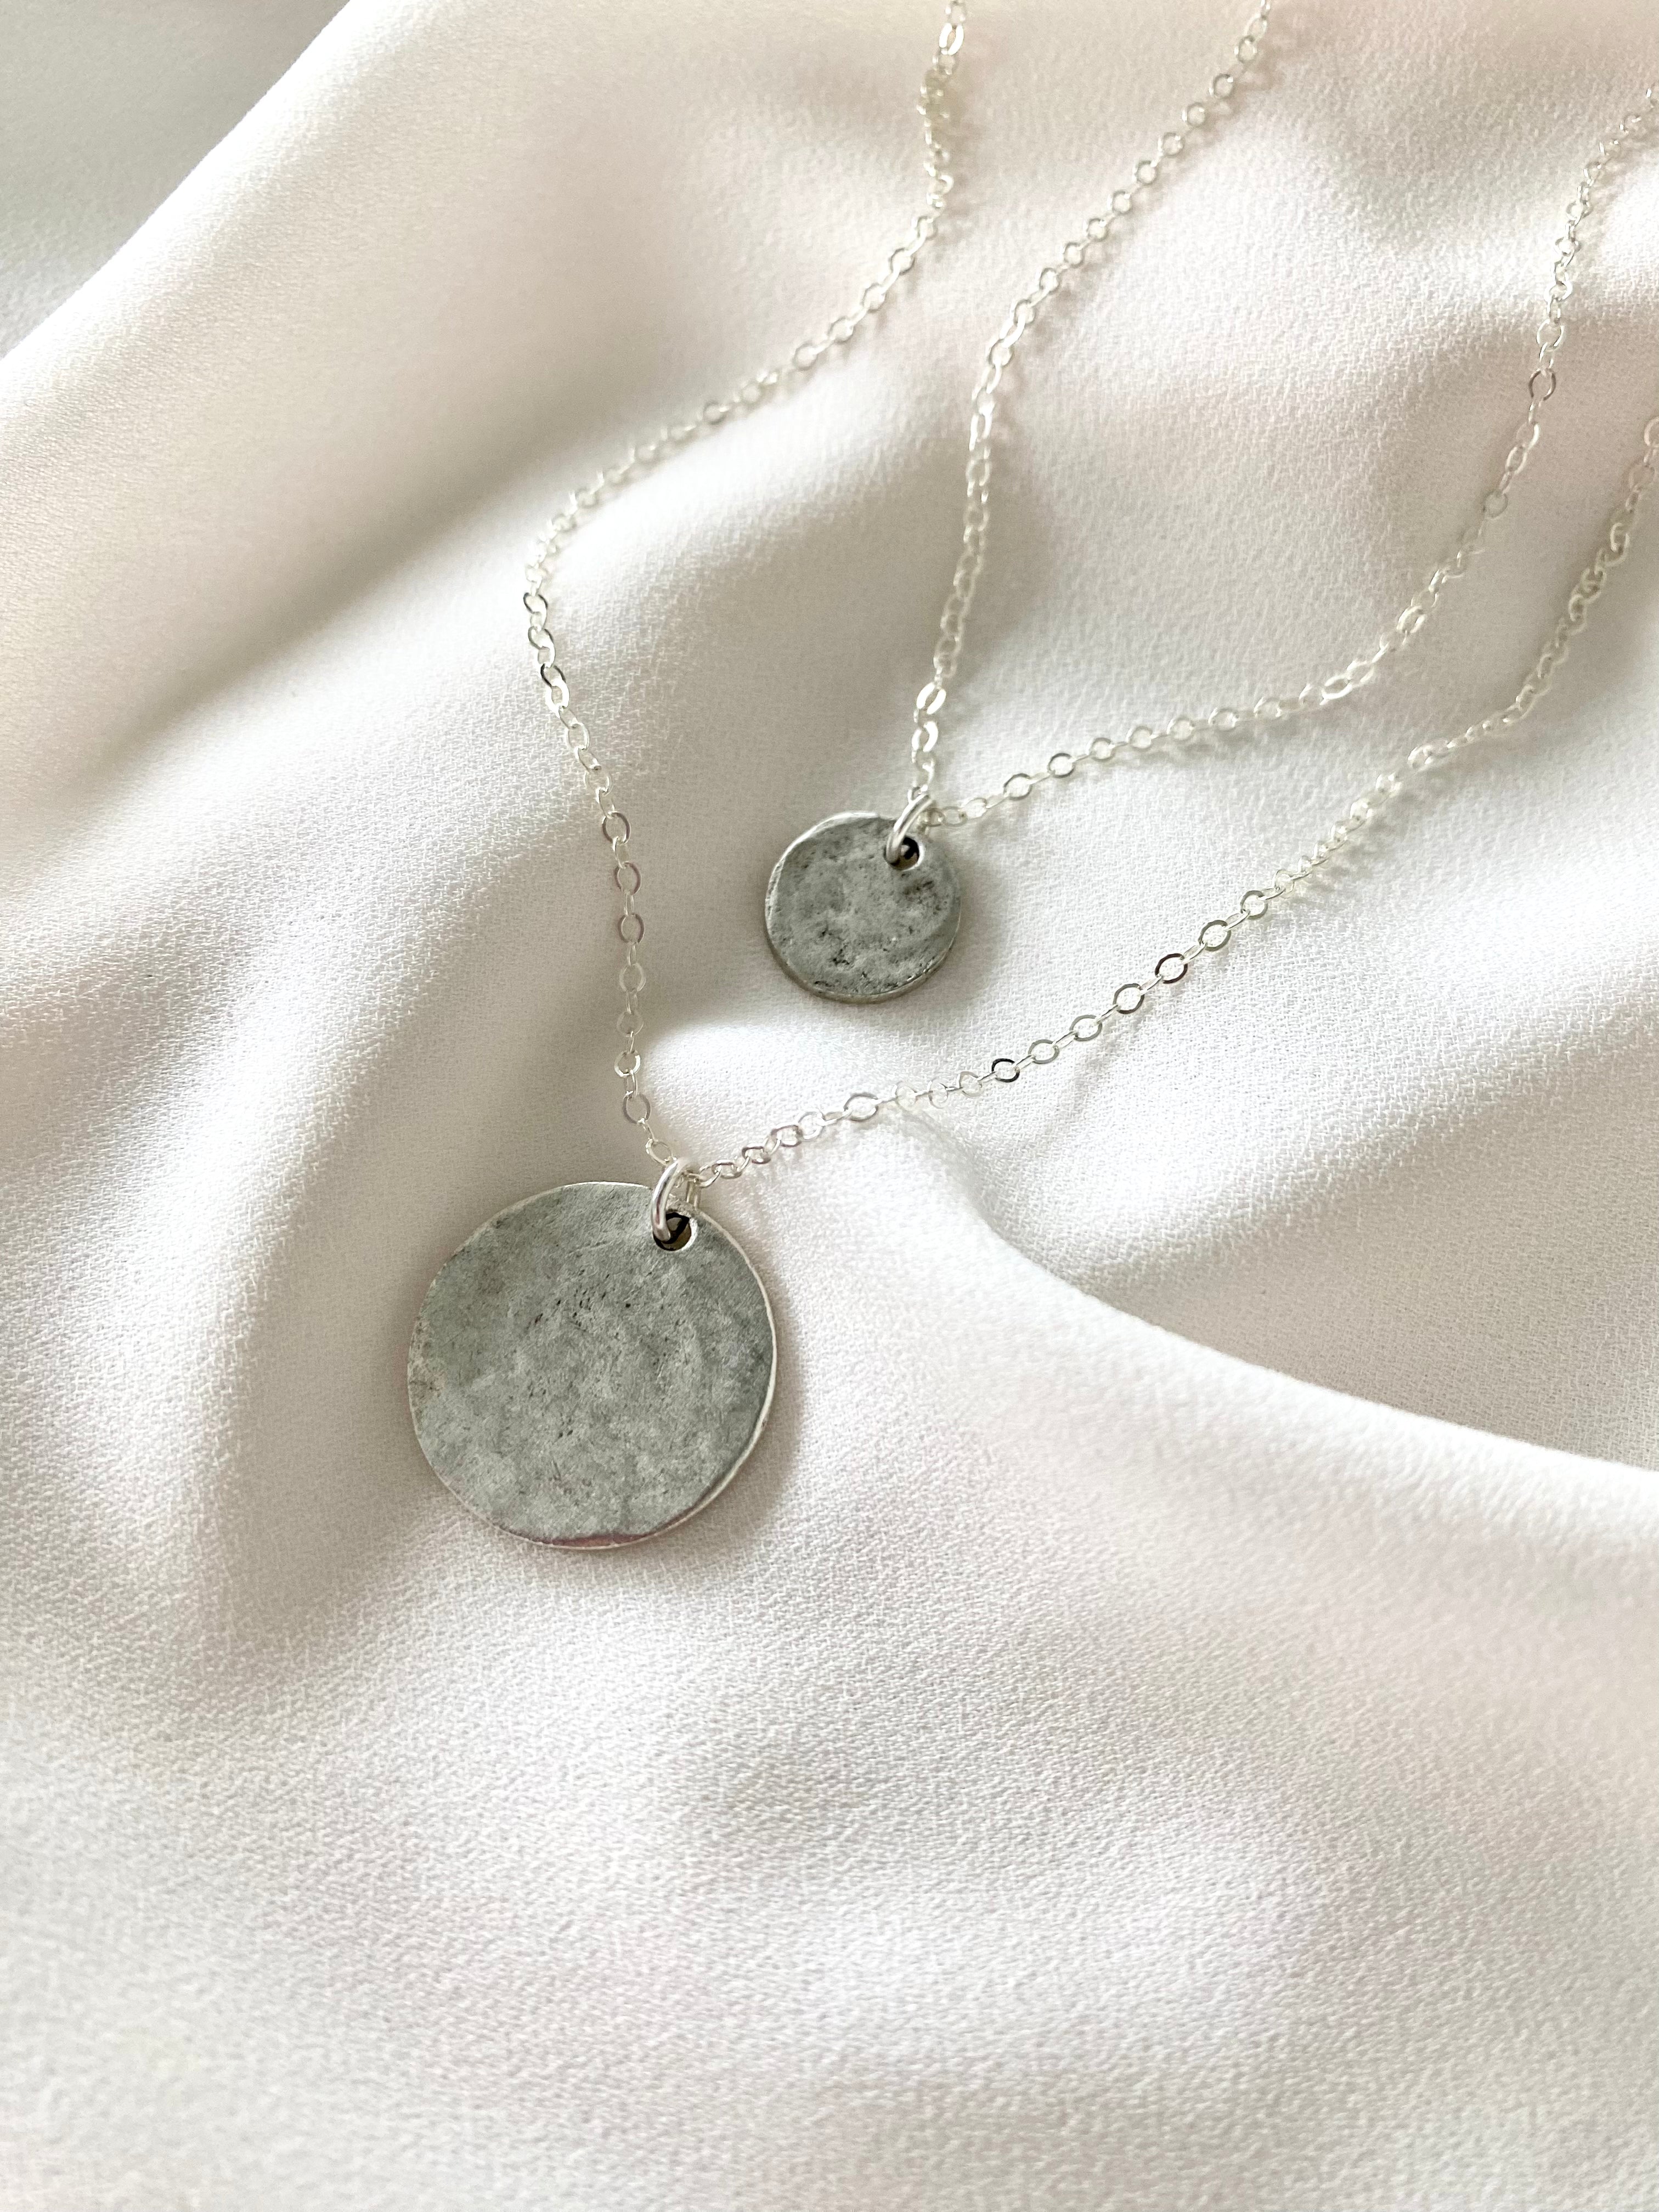 Hammered Pewter Silver Coin Pendant Necklace